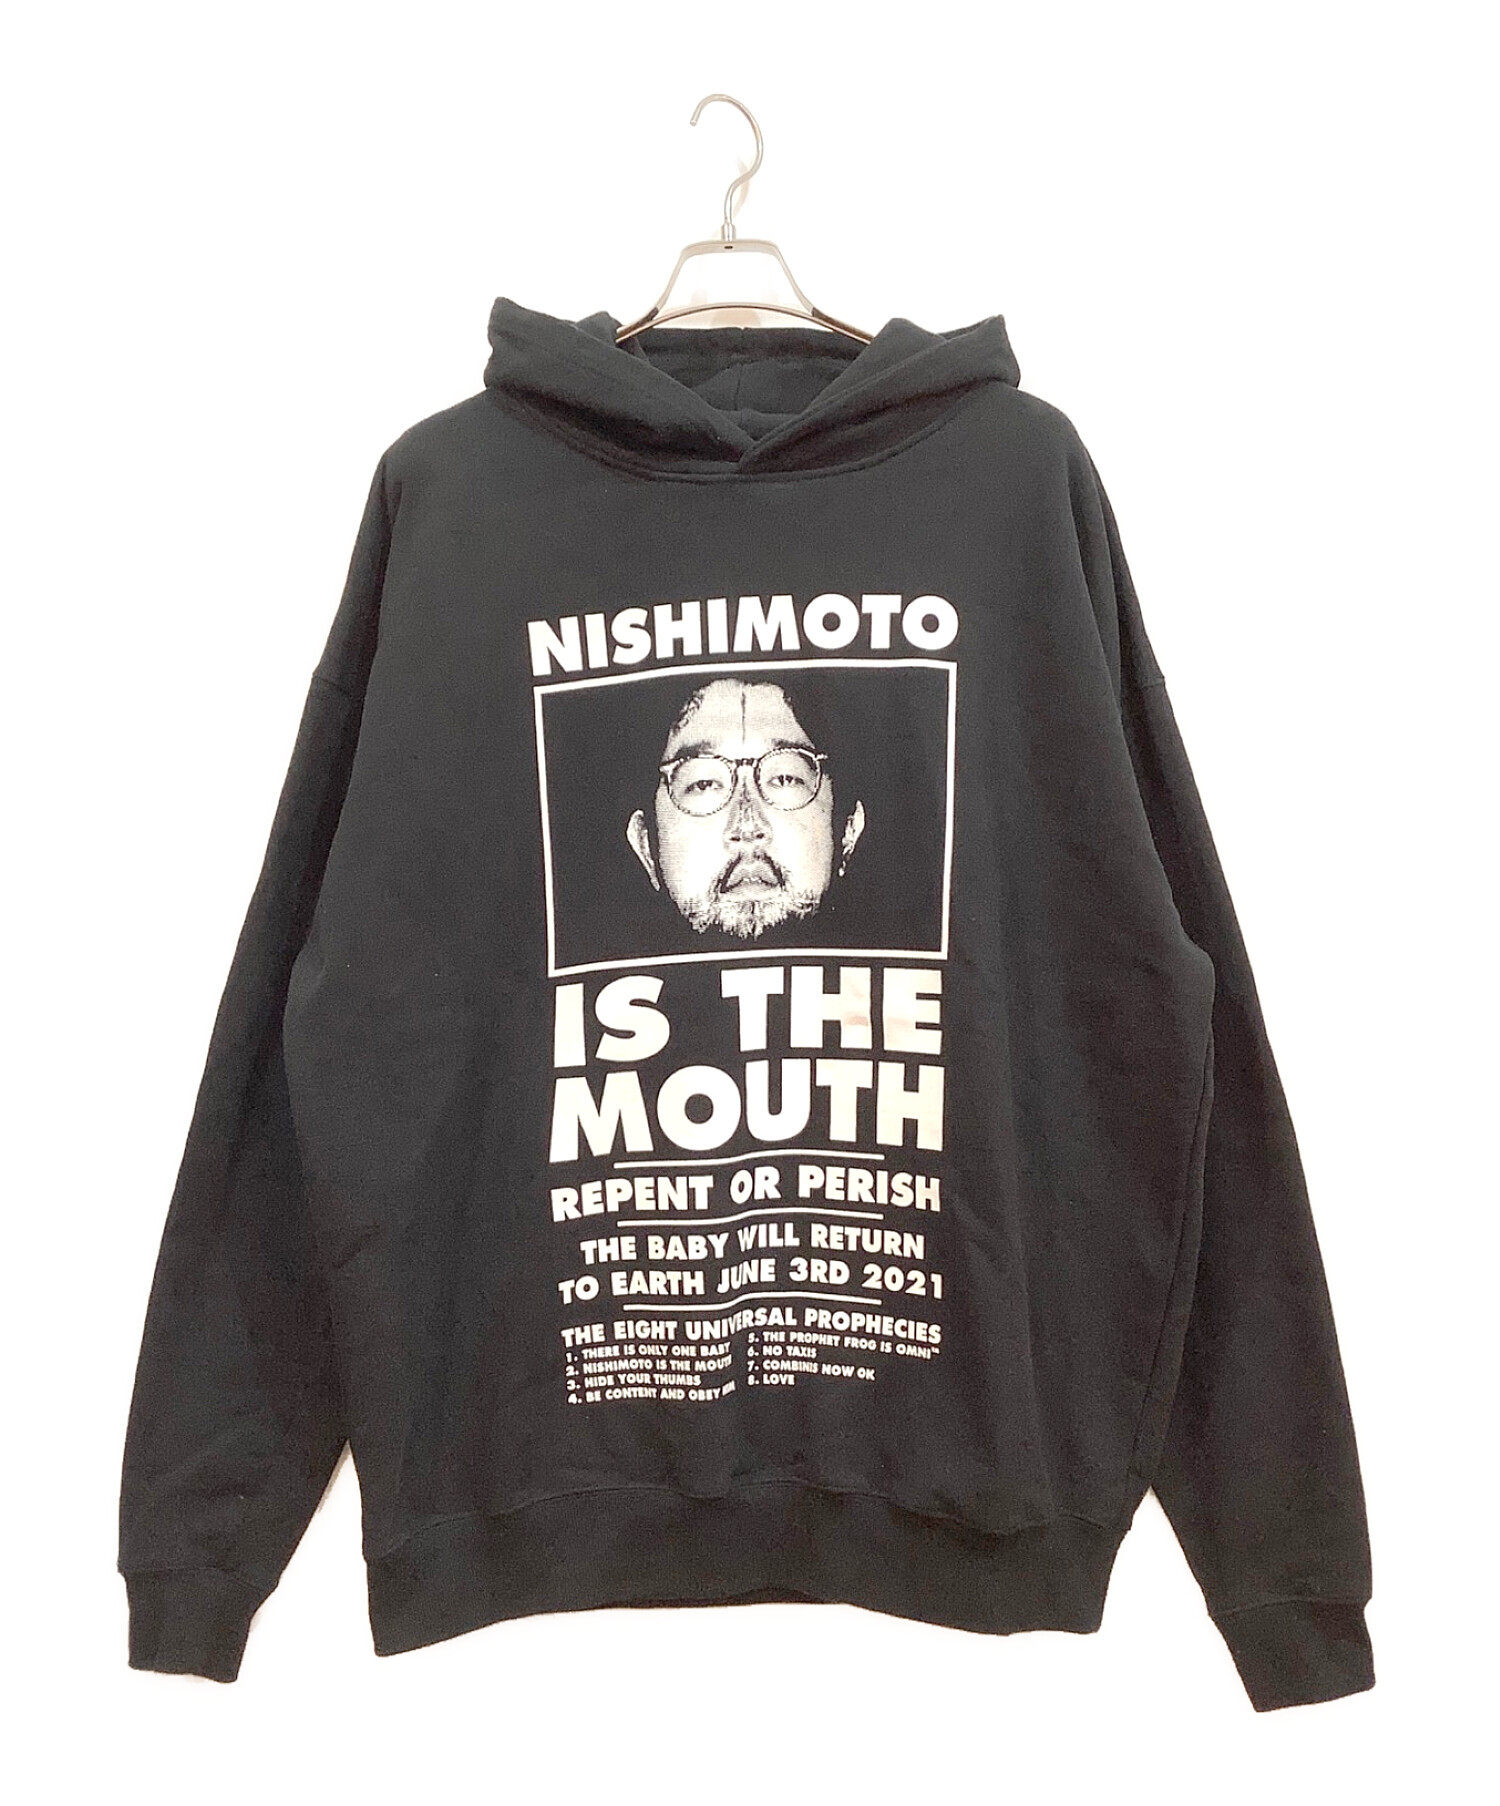 nishimoto is the mouth パーカー